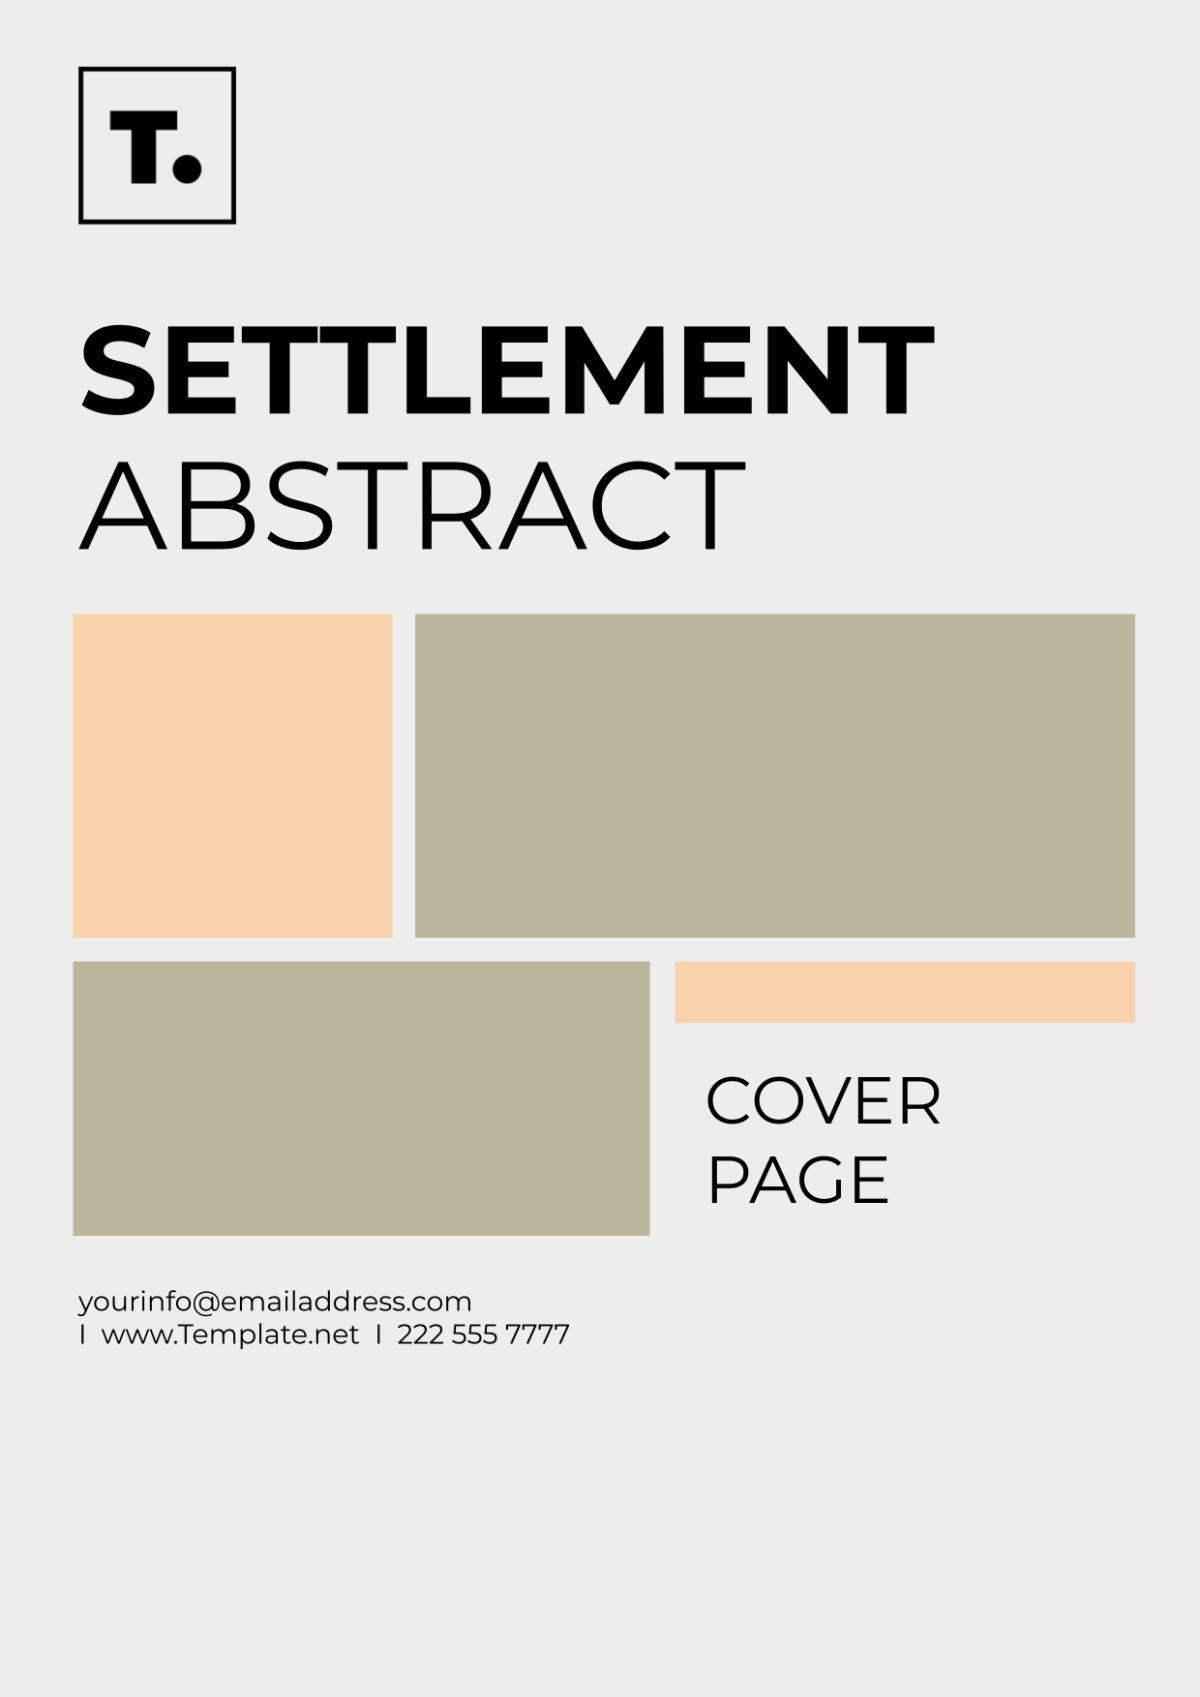 Settlement Abstract Cover Page